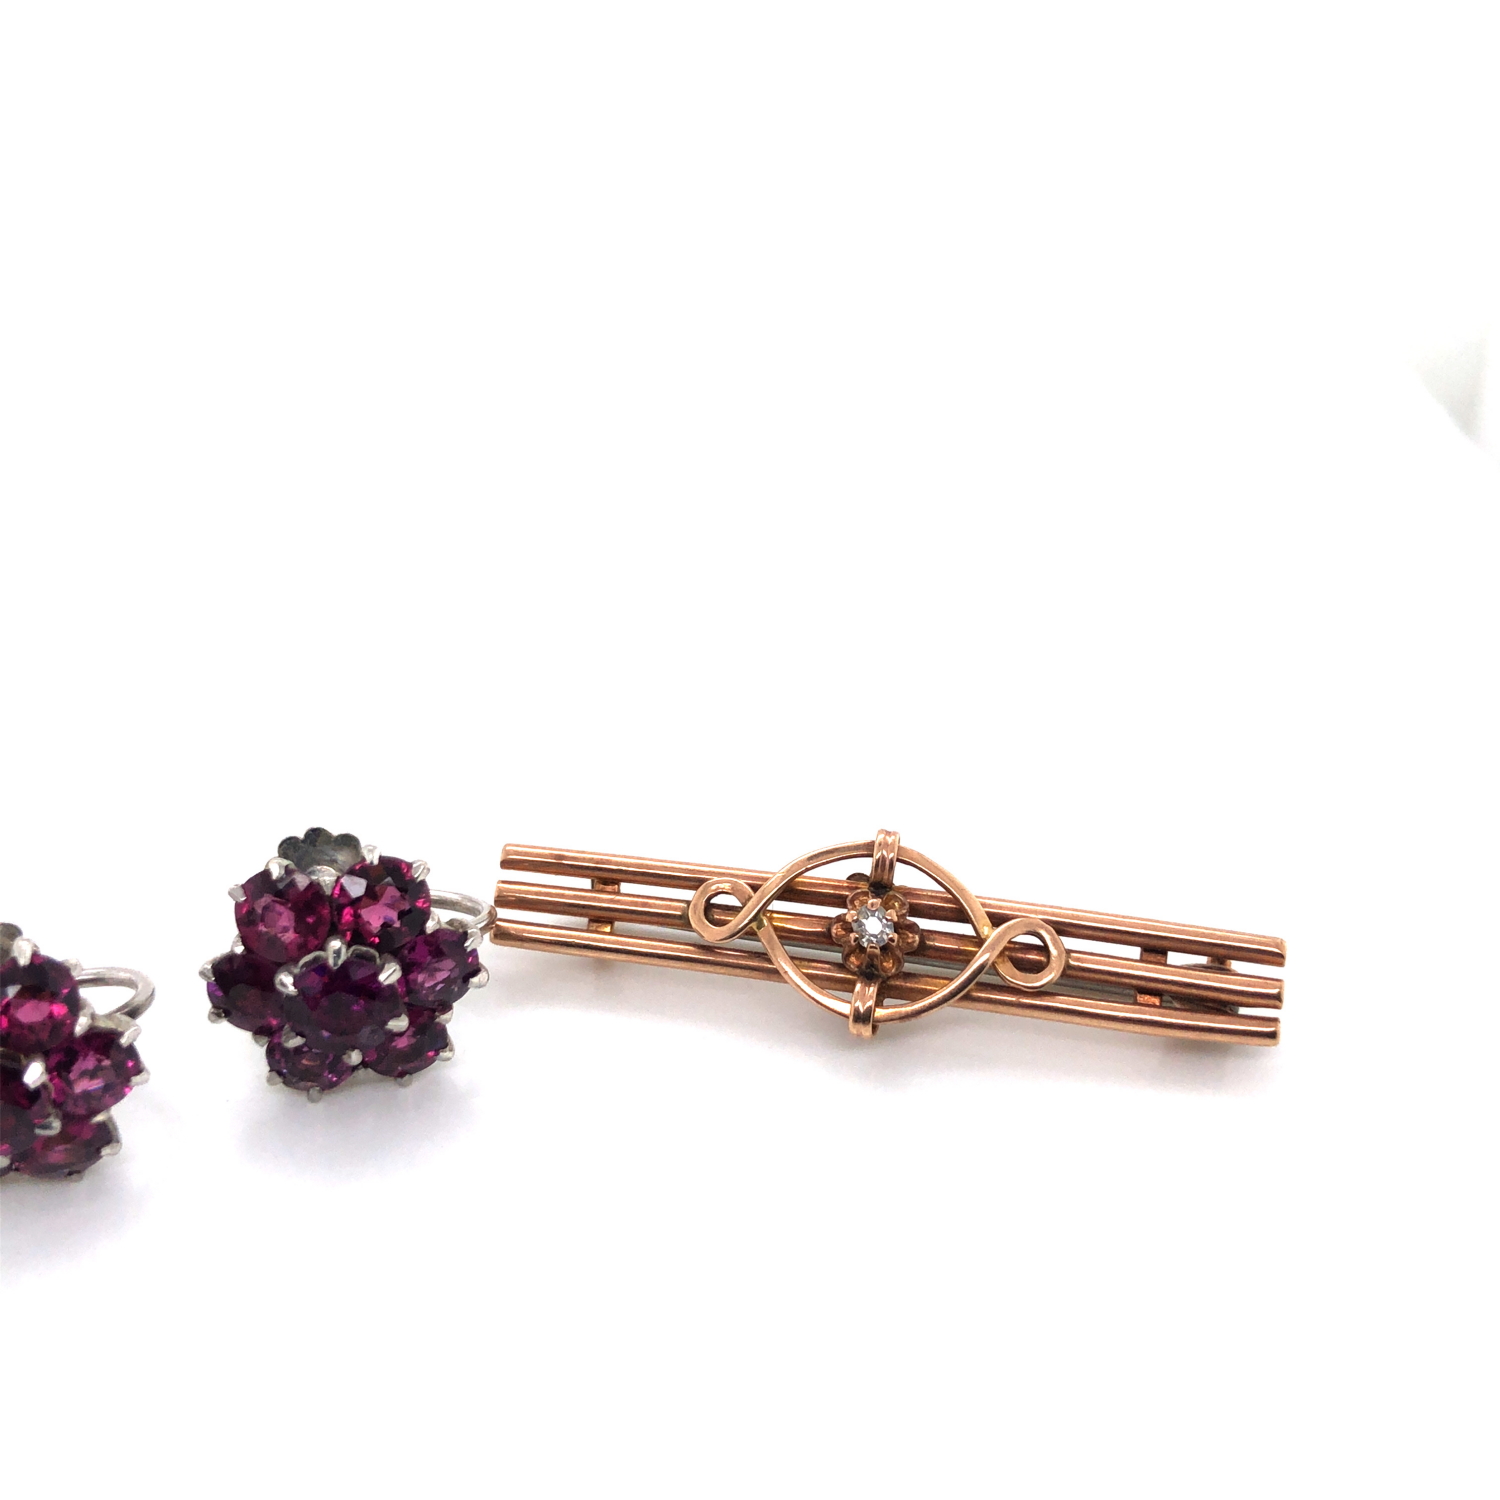 A PAIR OF VINTAGE PINK SAPPHIRE CLUSTER EARRINGS FITTED WITH SCREW BACKS, TOGETHER WITH A VINTAGE - Image 2 of 4